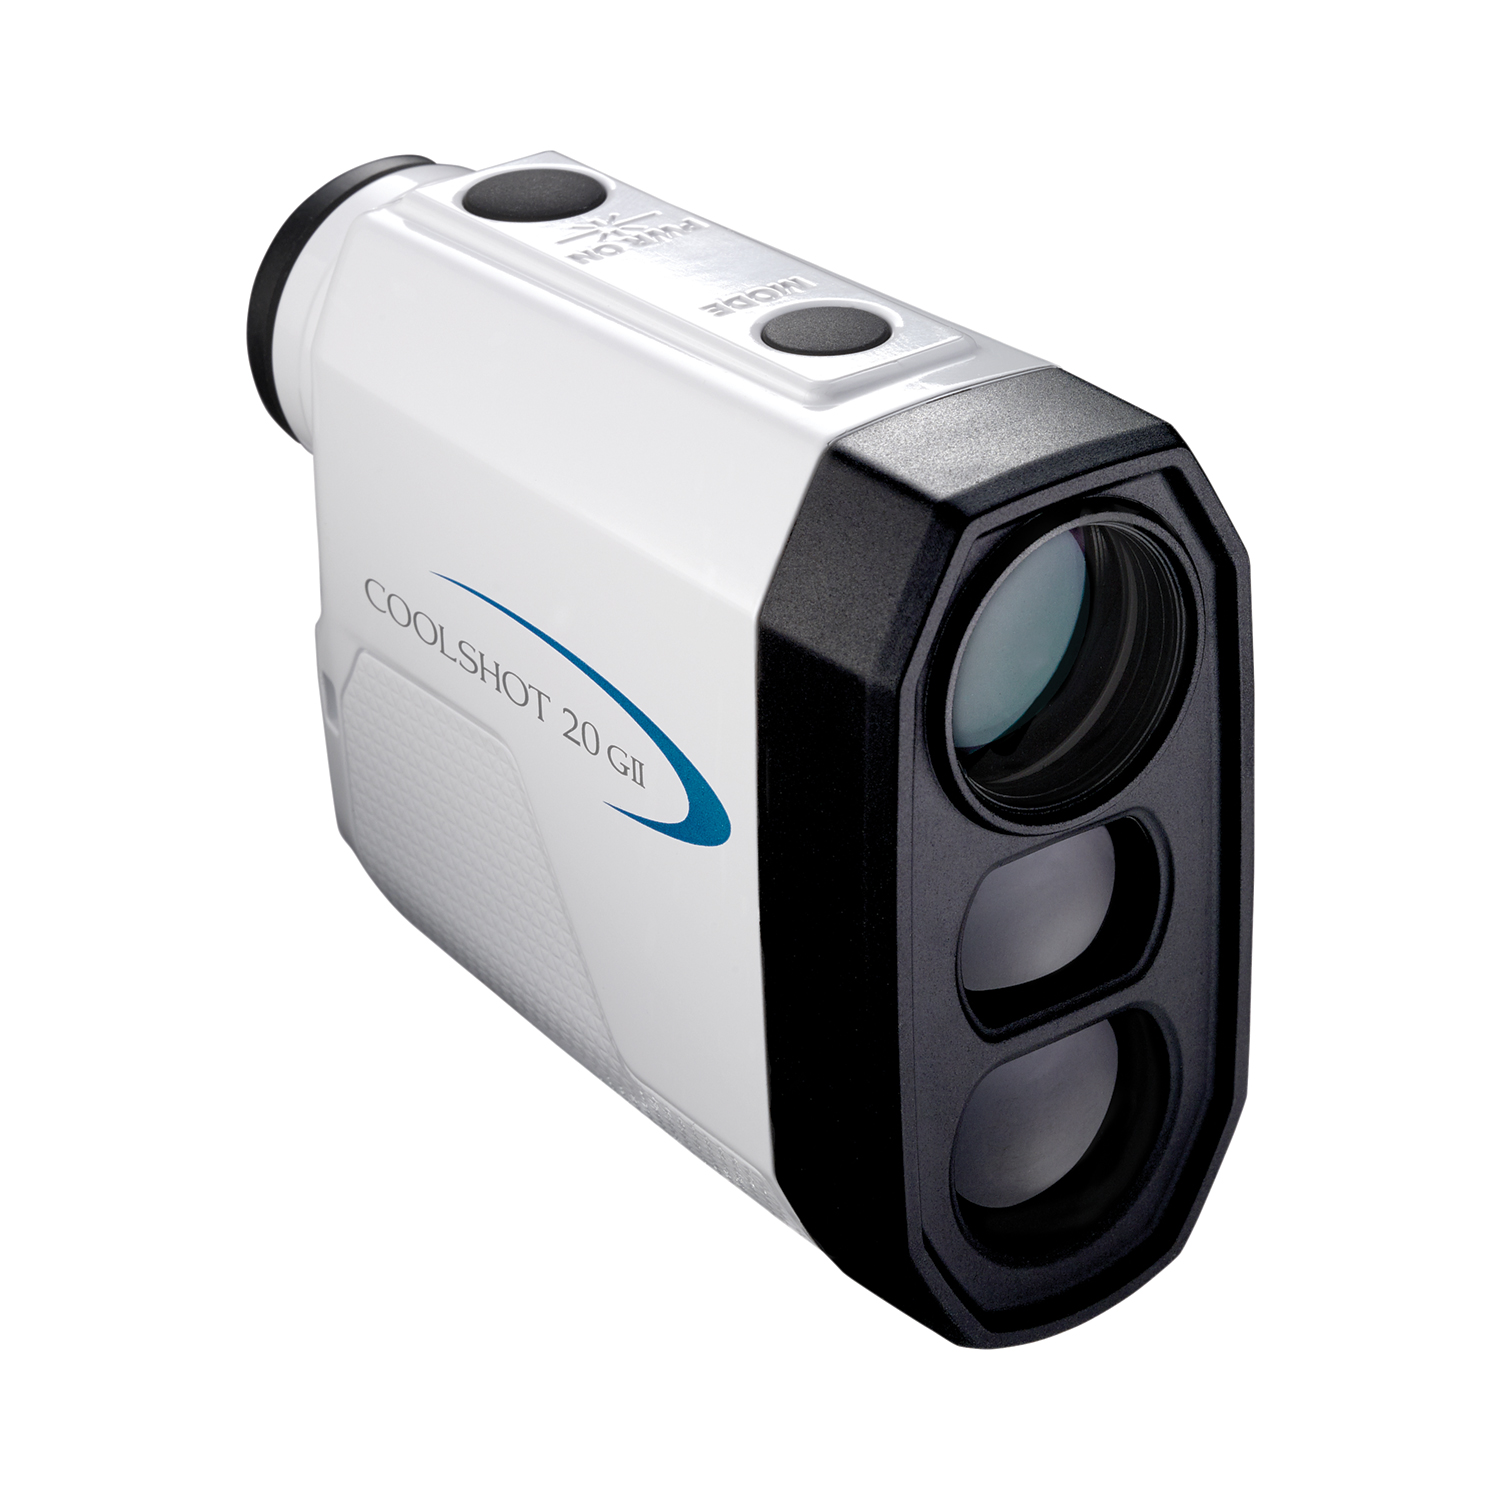 Nikon Rolls Out Two New COOLSHOT Golf Rangefinders | Flagstick.com